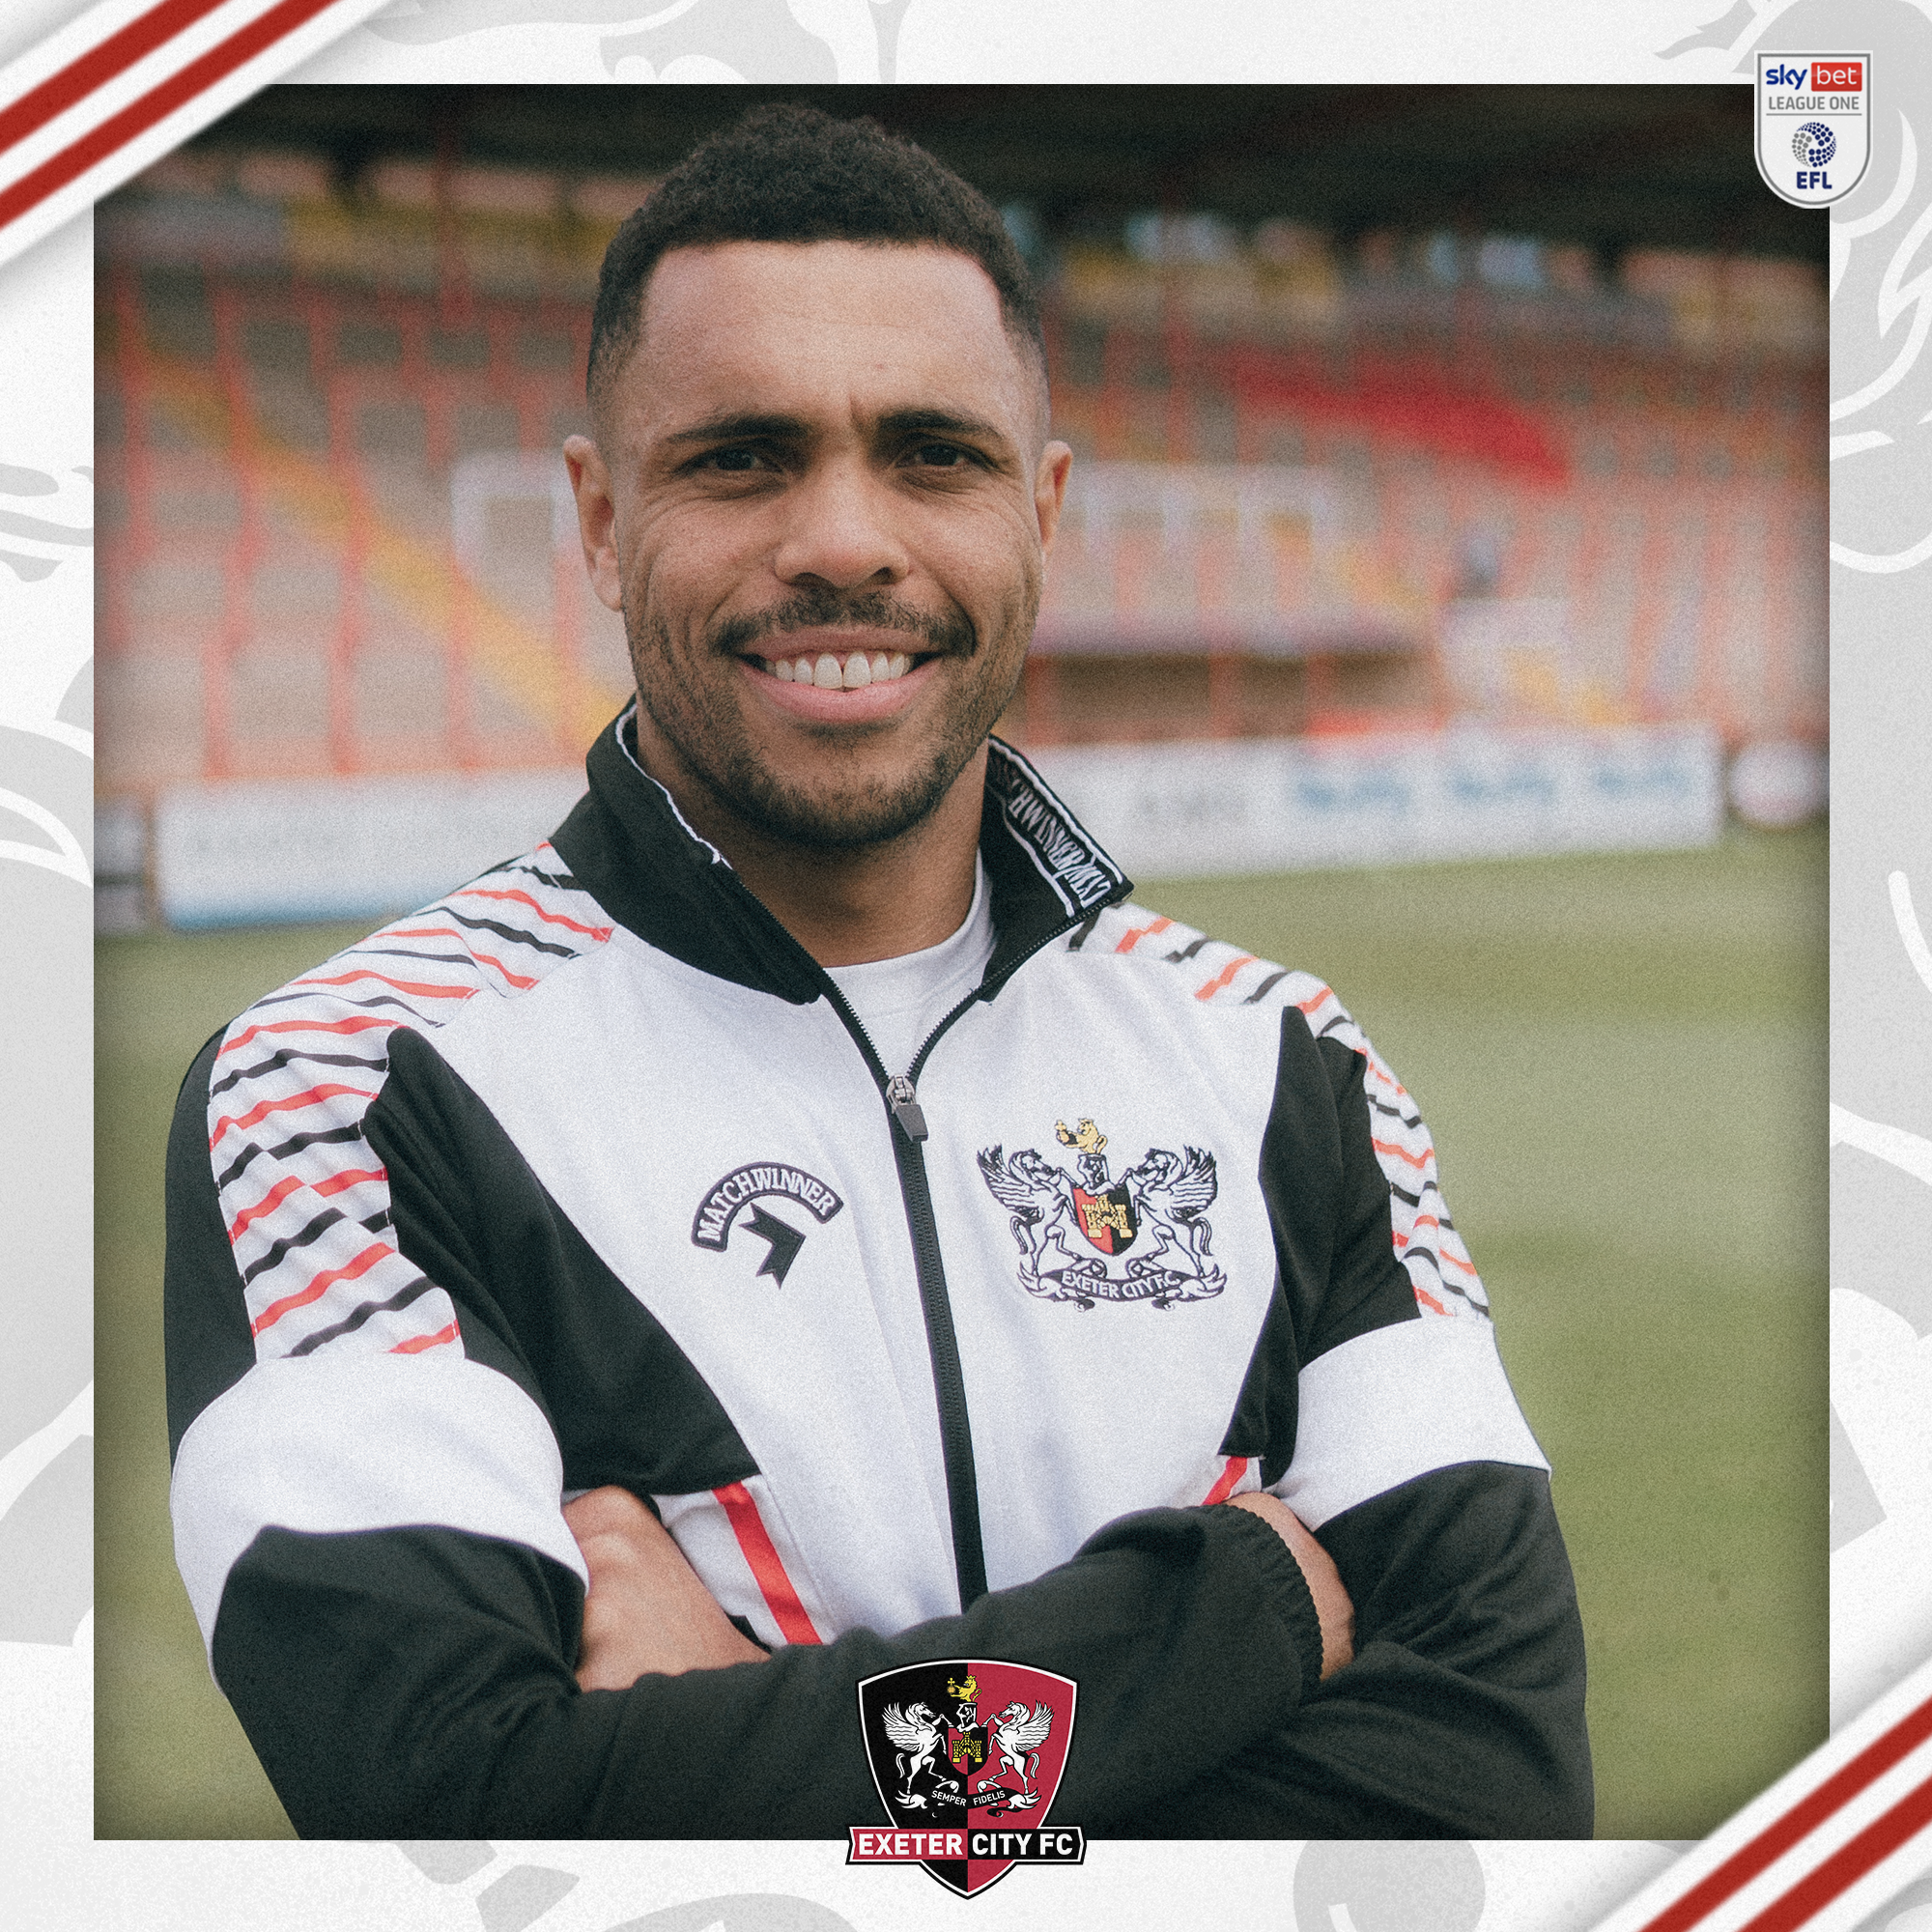 Josh Magennis with his arms folded wearing a retro Exeter City jacket